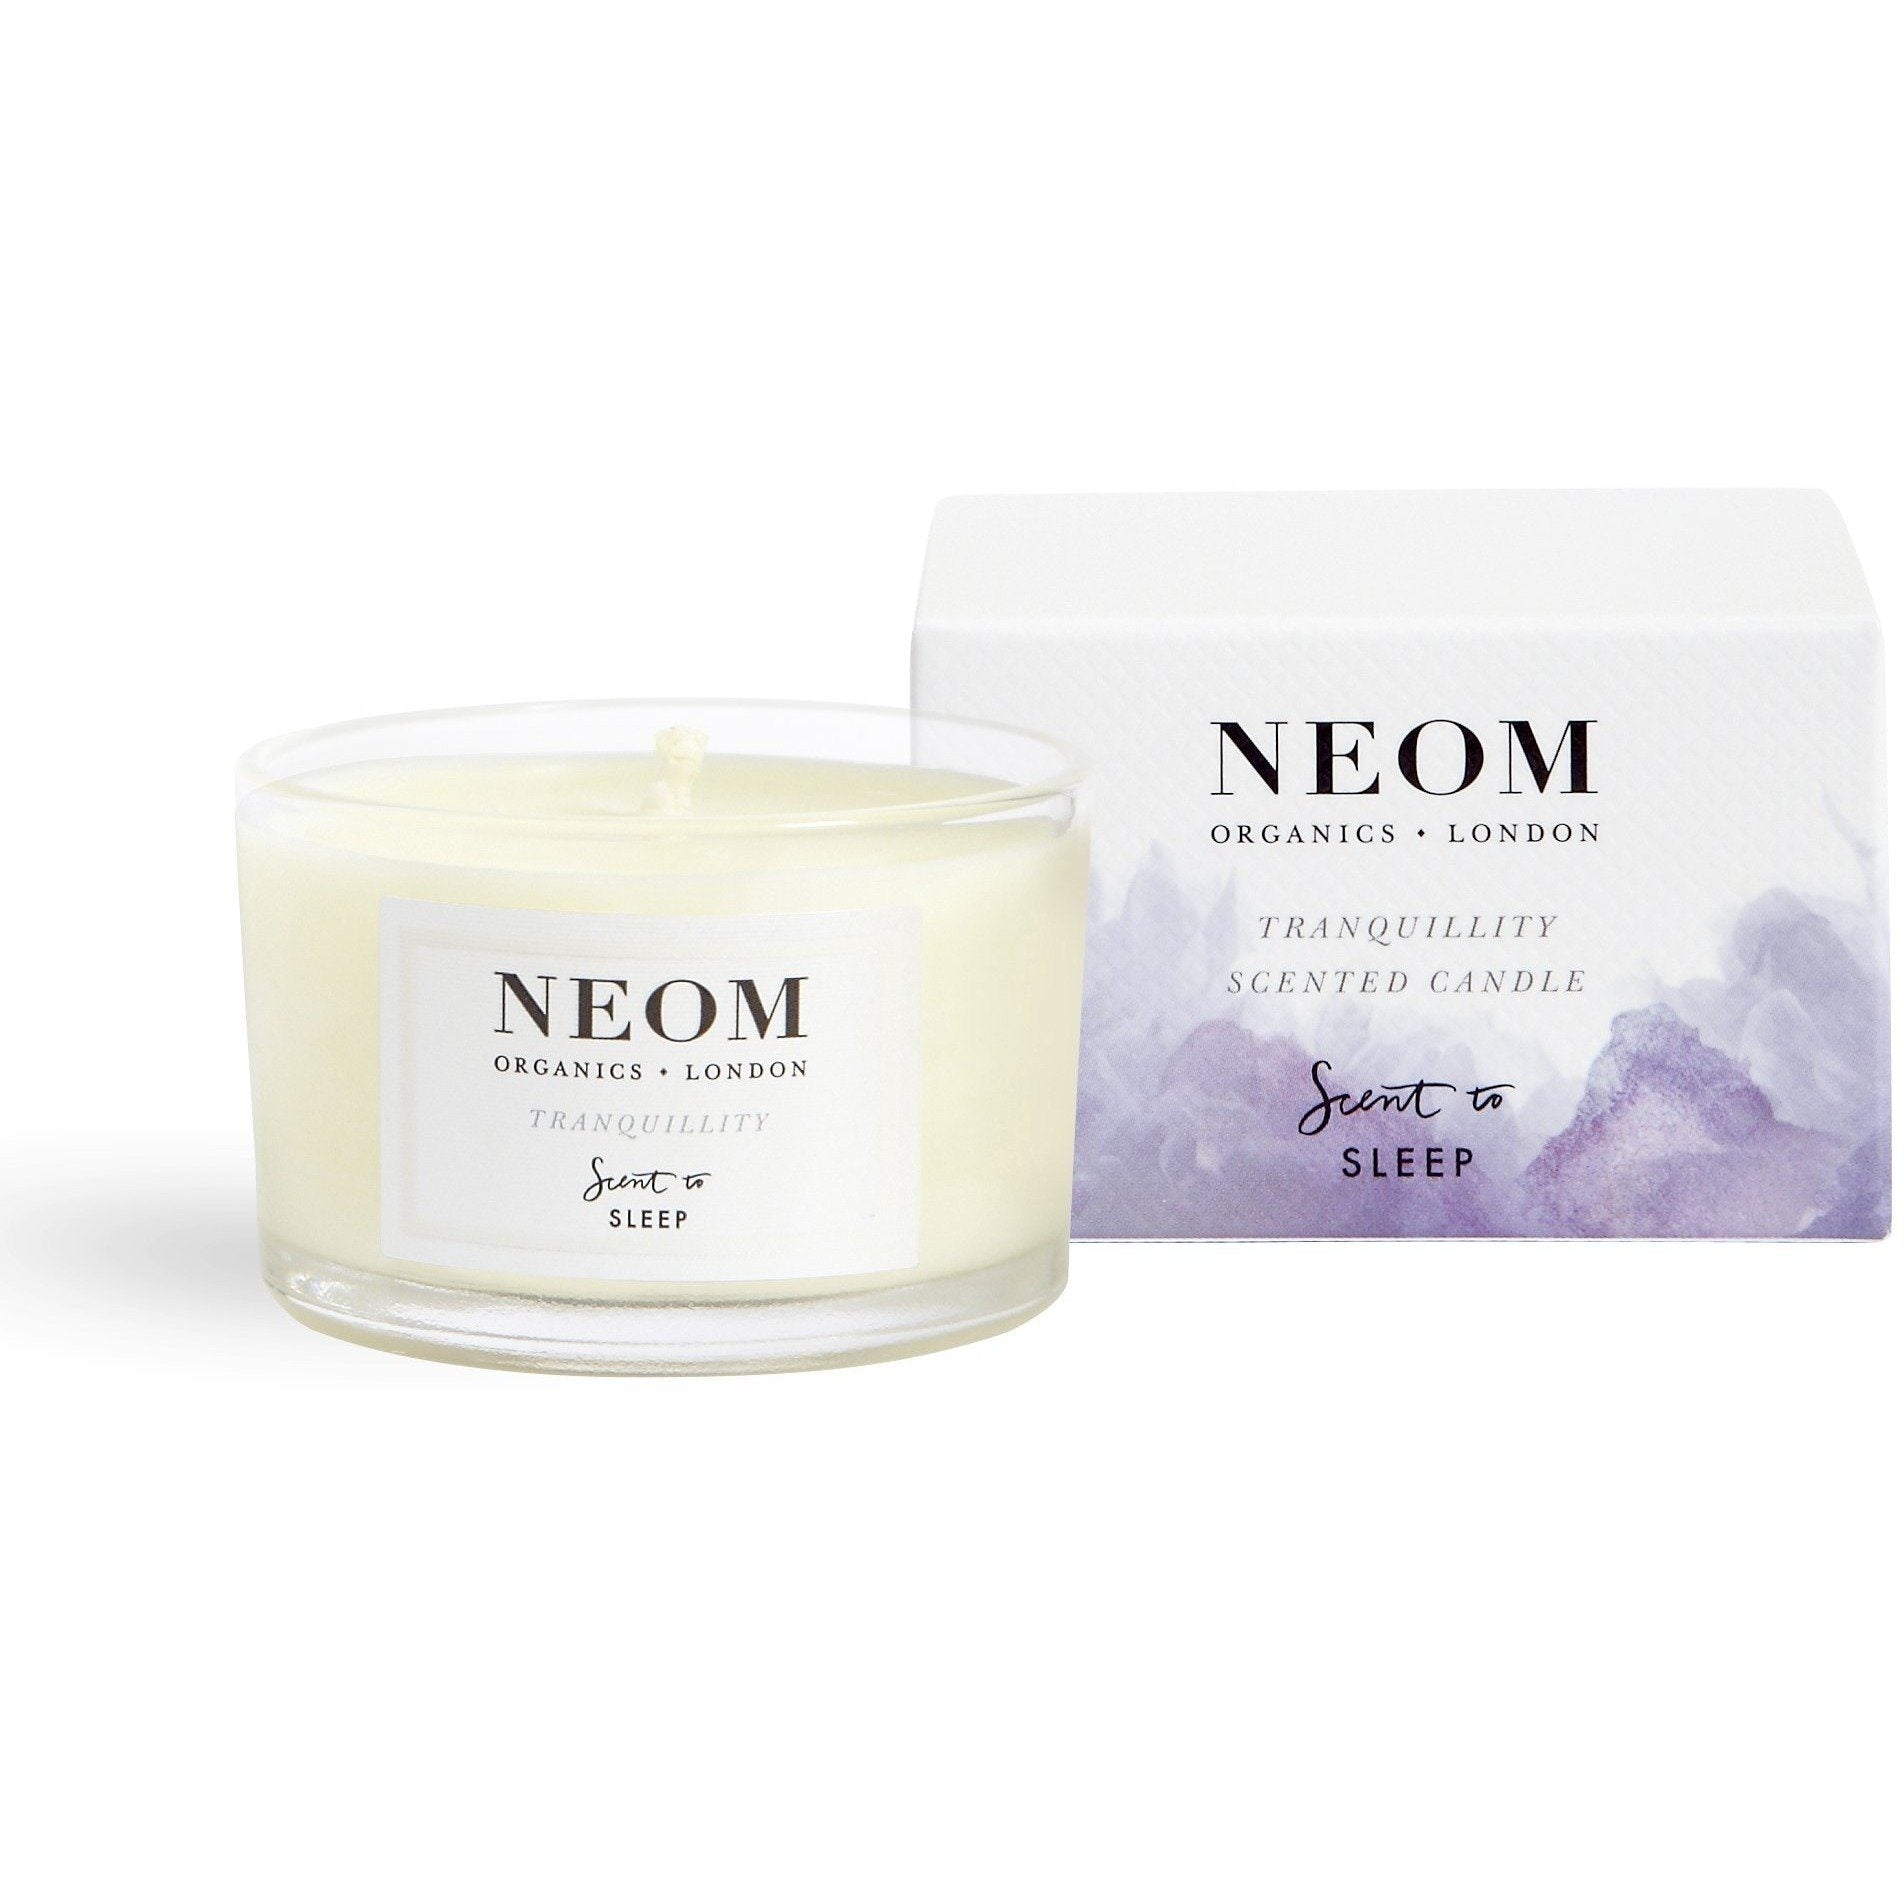 Neom Organics - Tranquillity Travel Scented Candle - Kate's Kitchen